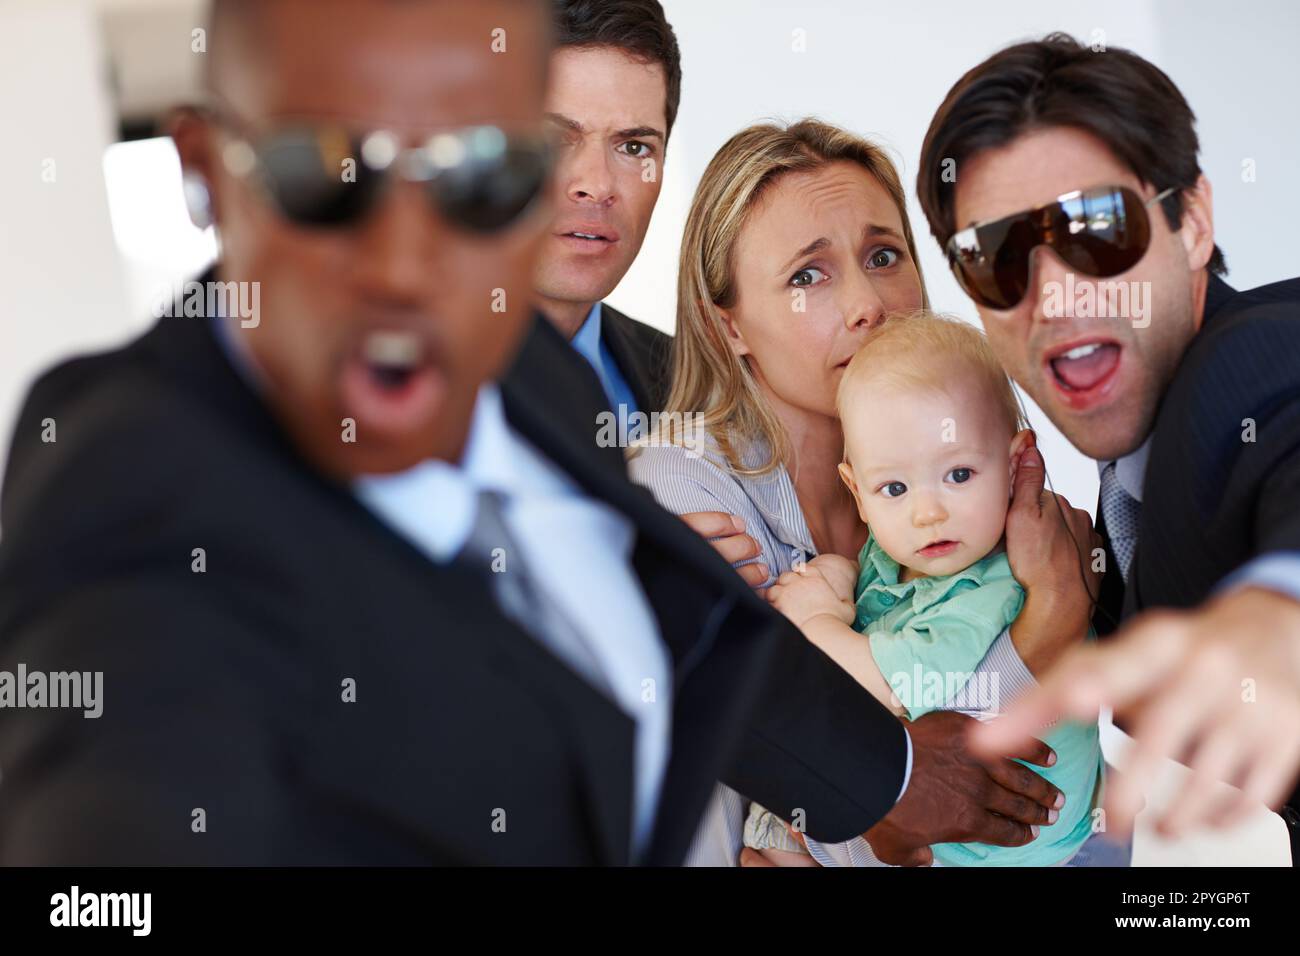 Responding to a threat. two bodyguards protecting their clients against a threat. Stock Photo